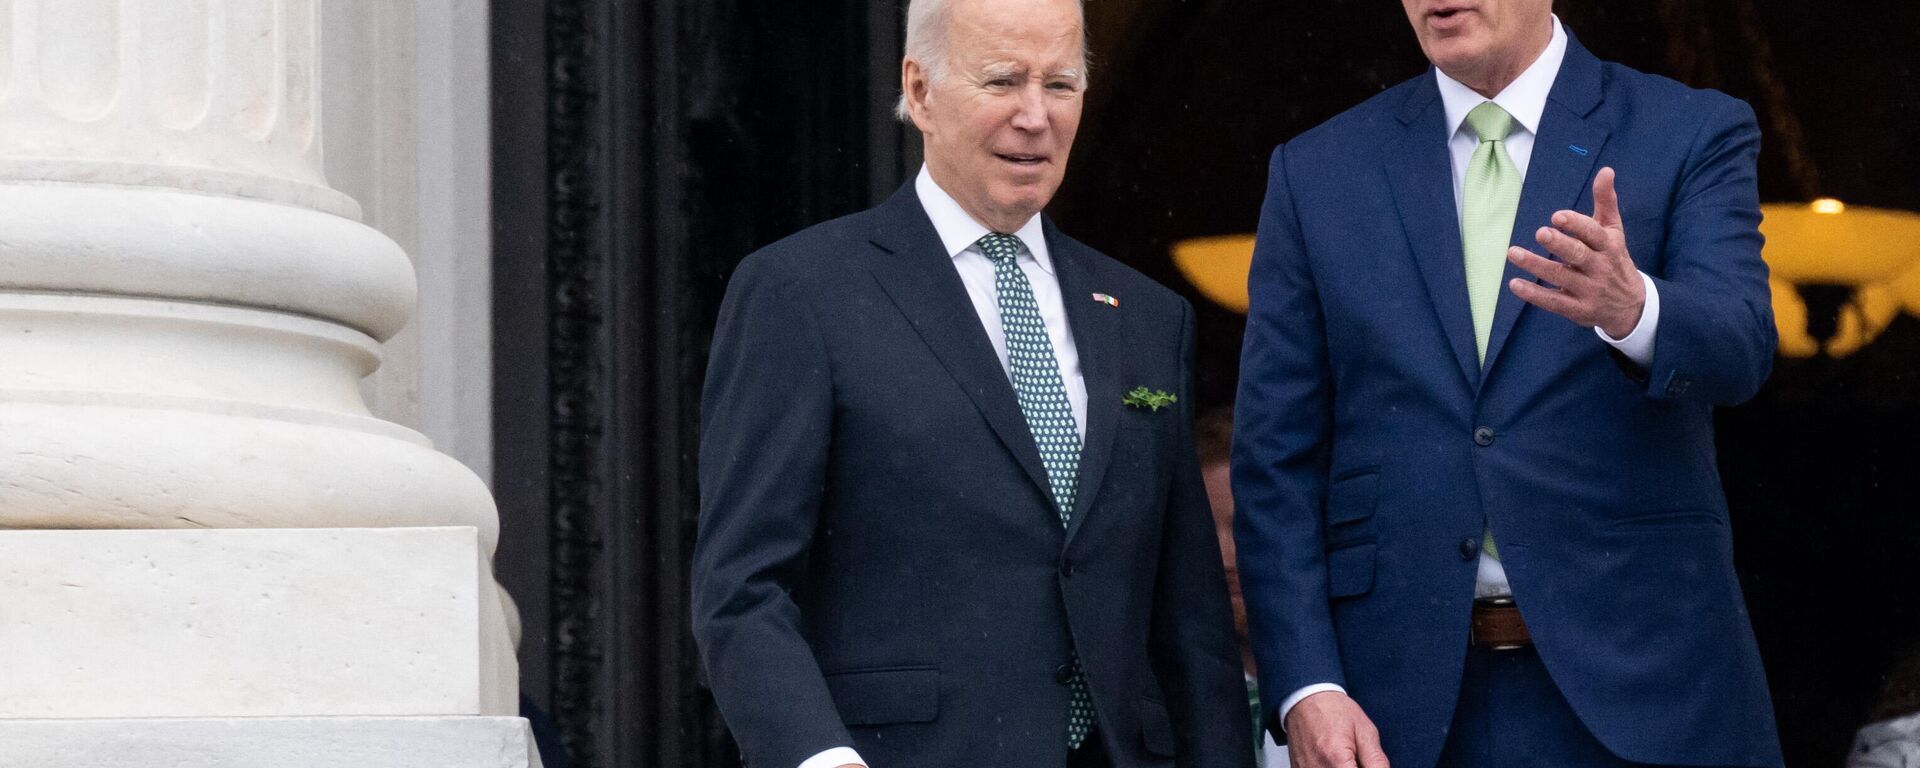 US President Joe Biden, accompanied by Speaker of the House Kevin McCarthy, Republican of California, leaves after the annual St. Patrick's Day Dinner at the US Capitol in Washington, D.C., March 17, 2023 - Sputnik International, 1920  , 23.05.2023